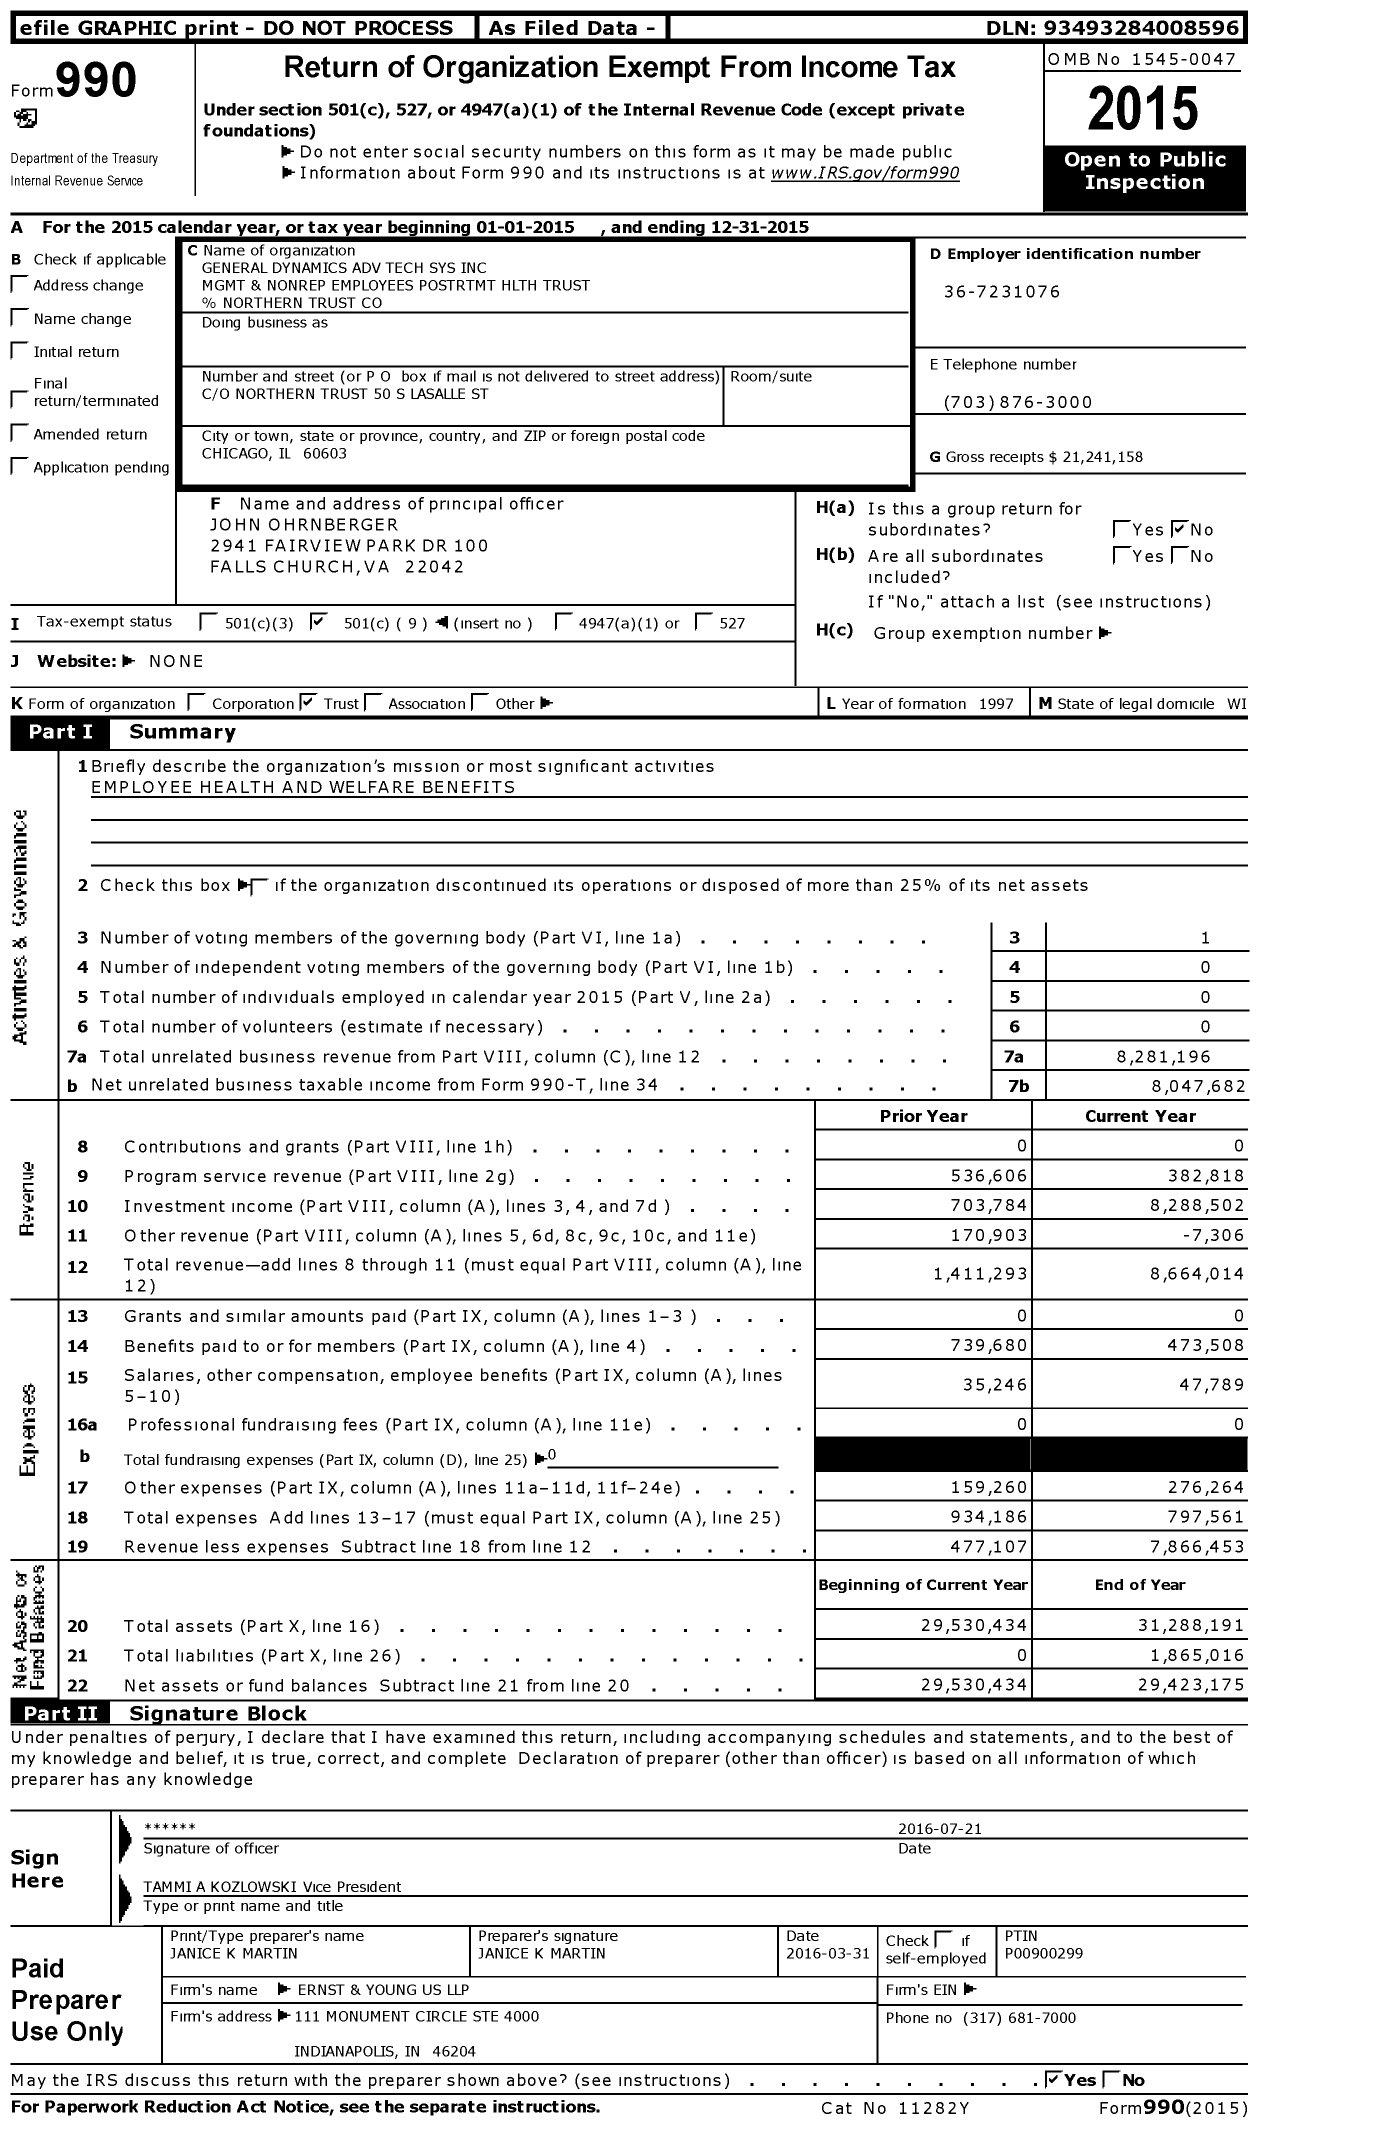 Image of first page of 2015 Form 990O for General Dynamics Adv Tech Sys MGMT and Nonrep Employees Postrtmt HLTH Trust